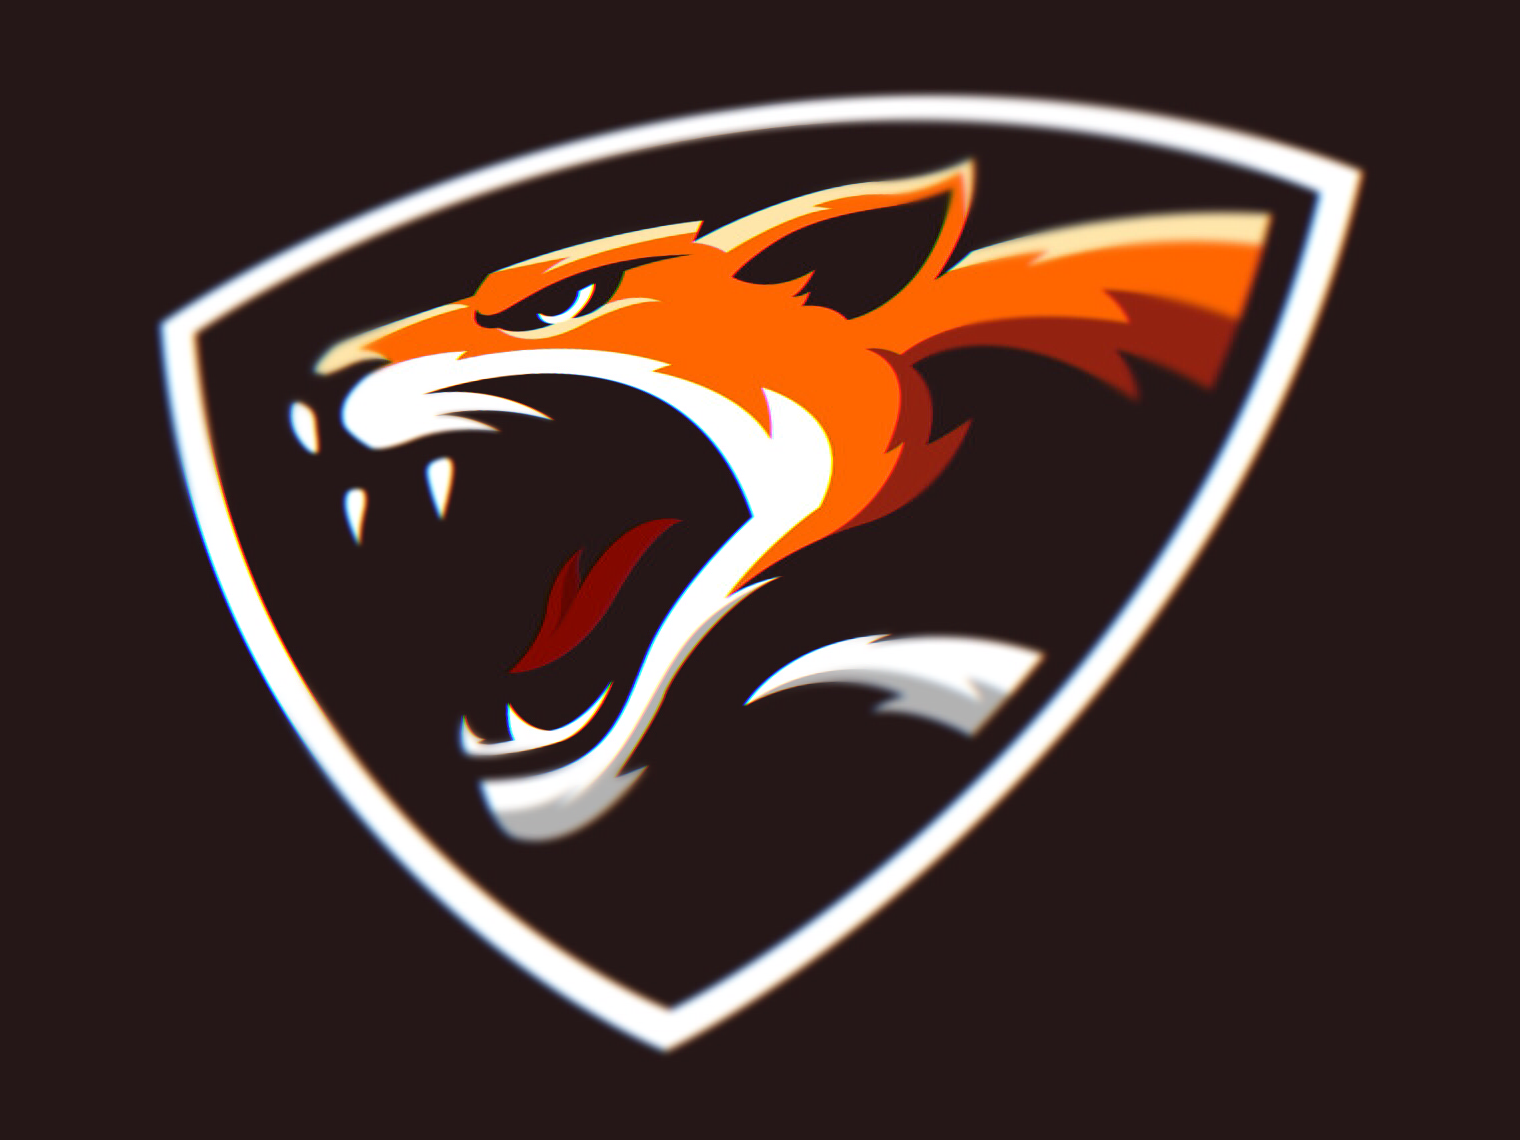 Panther Logo by enhance on Dribbble